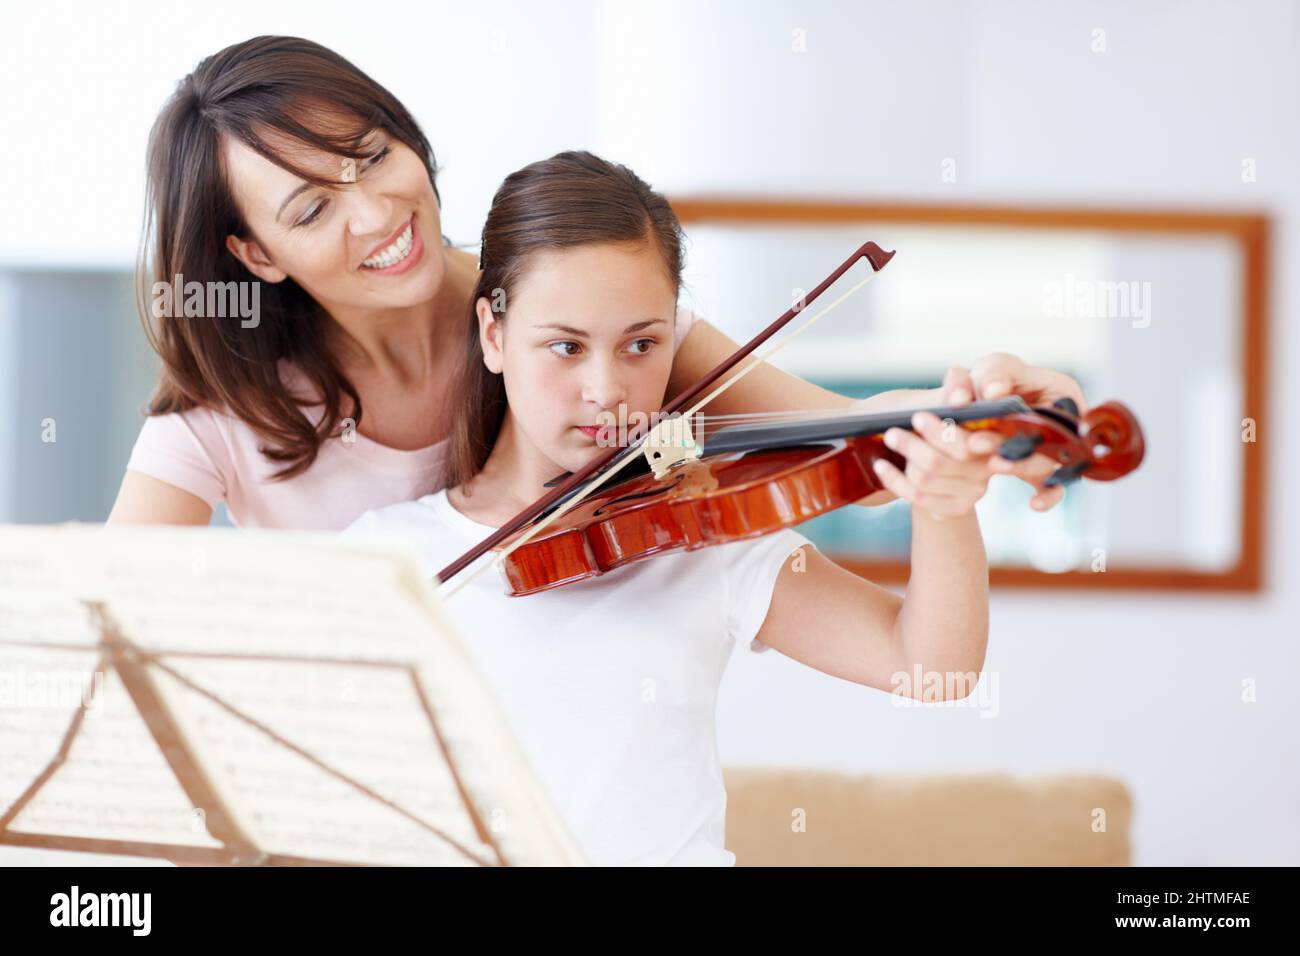 Practice makes perfect, my girl. A mother helping her daughter as she practices the violin - Copyspace. Stock Photo